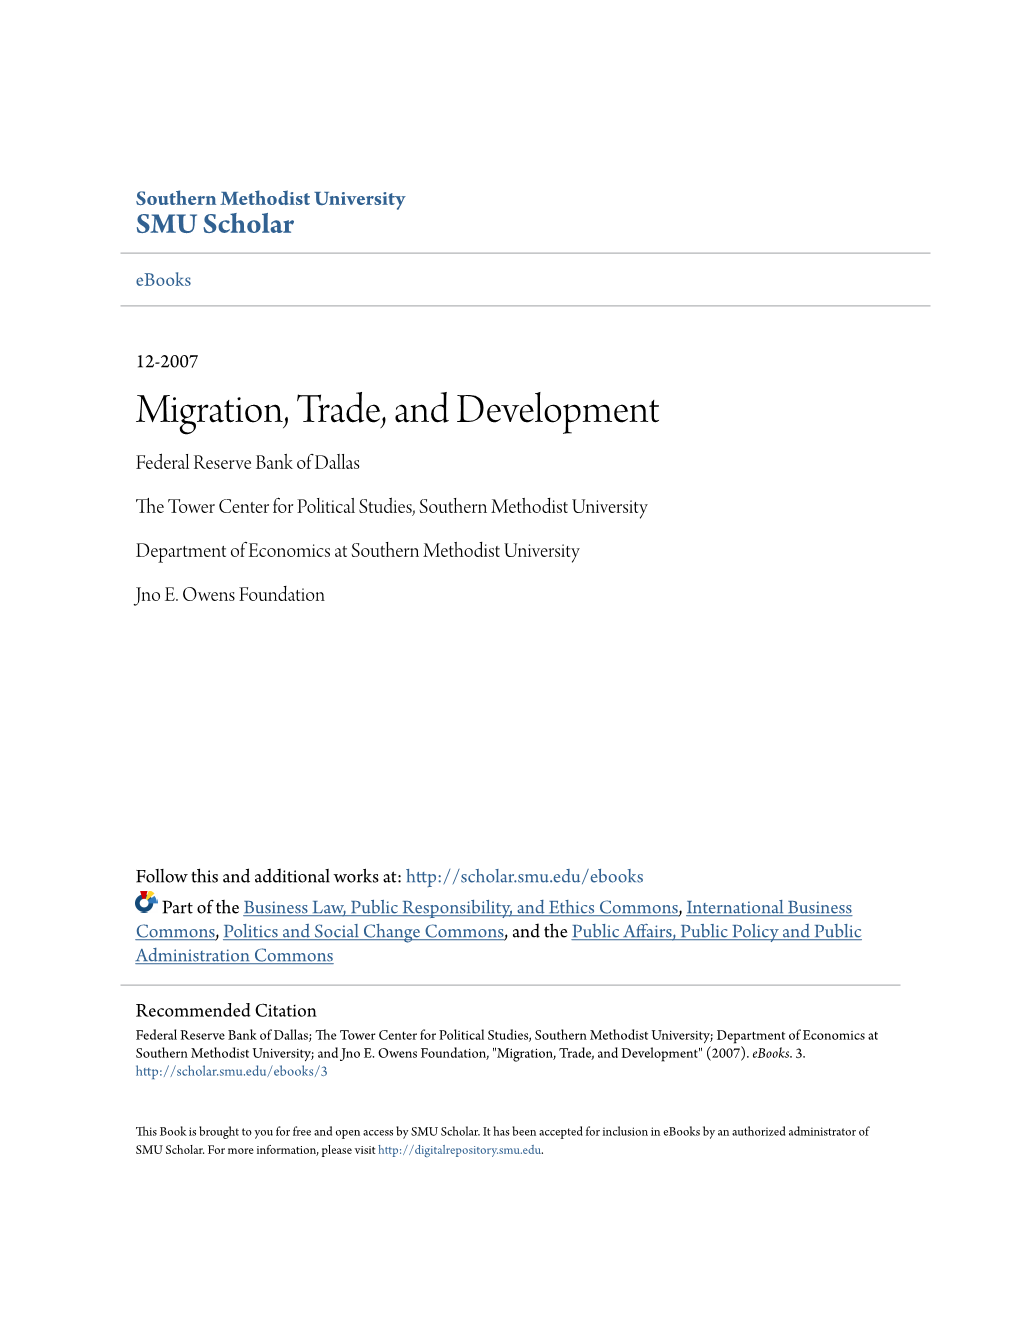 Migration, Trade, and Development Federal Reserve Bank of Dallas